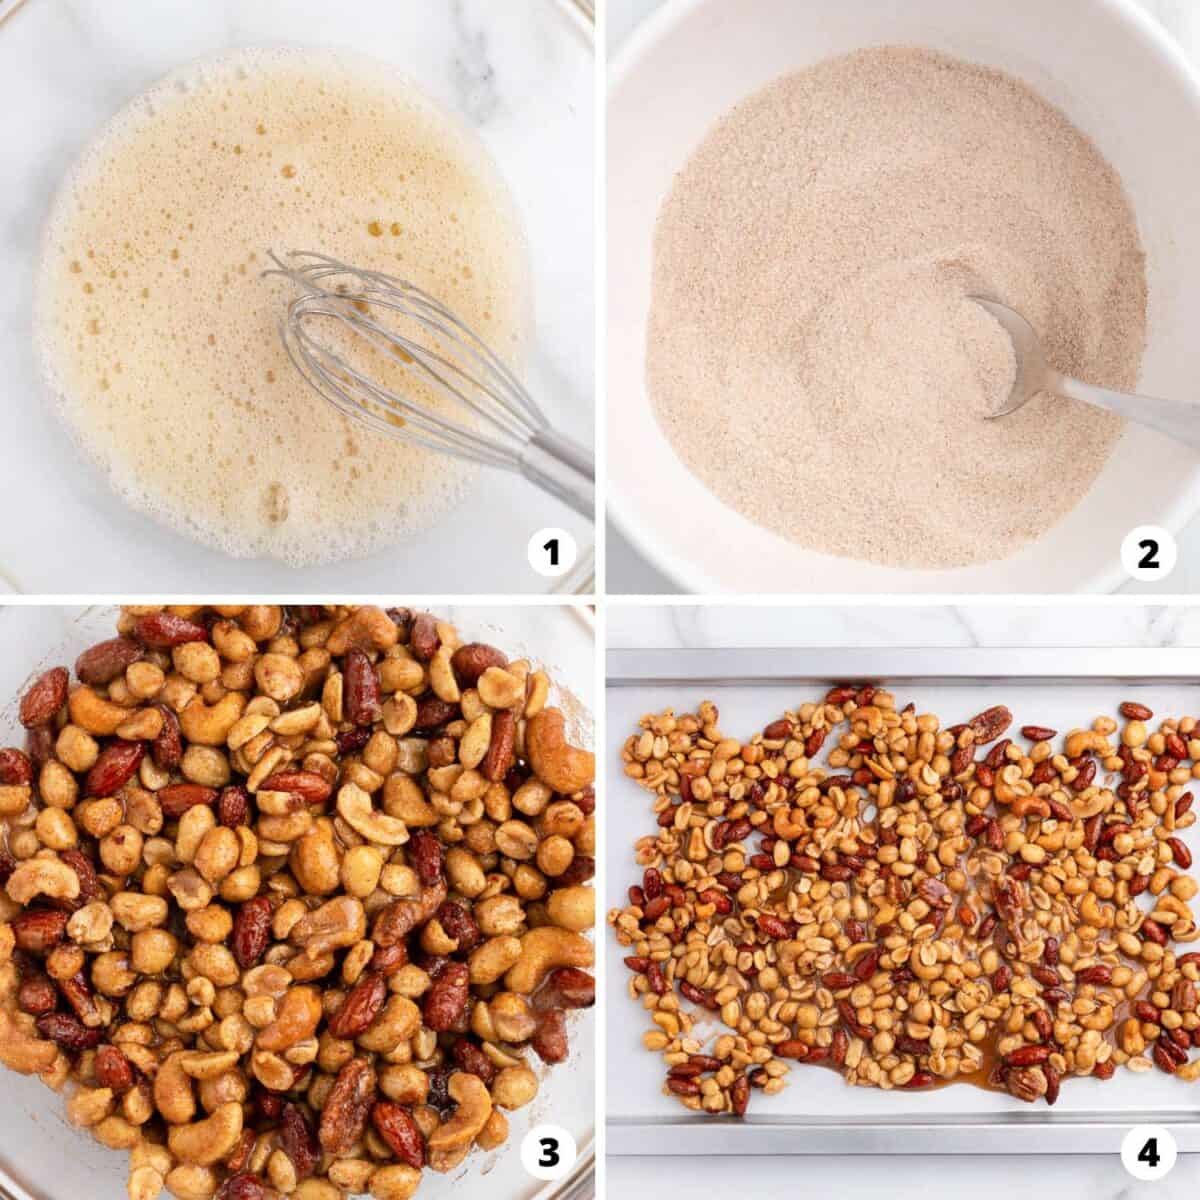 Showing how to make candied nuts in a 4 step collage.